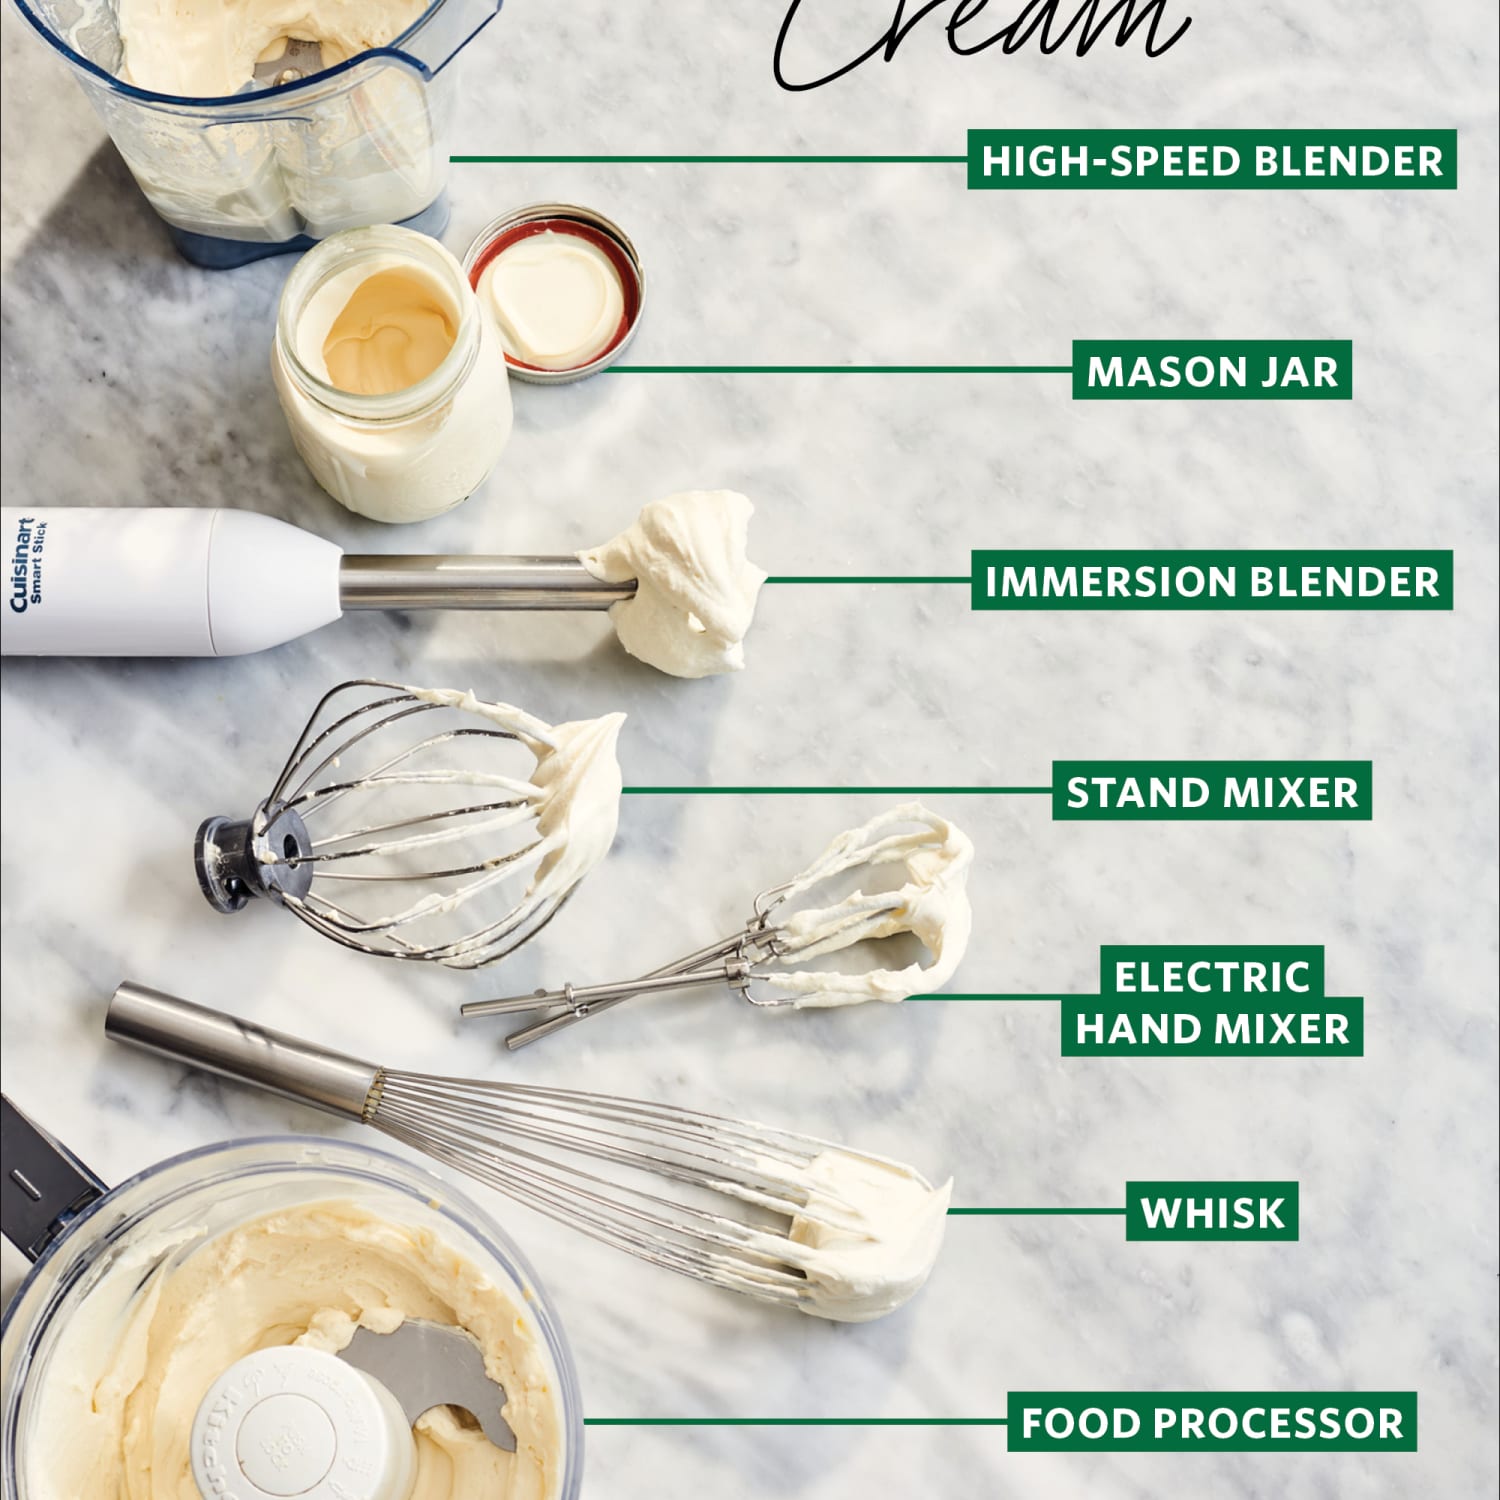 How To Make How To Make Whipped Cream - Once Upon a Chef